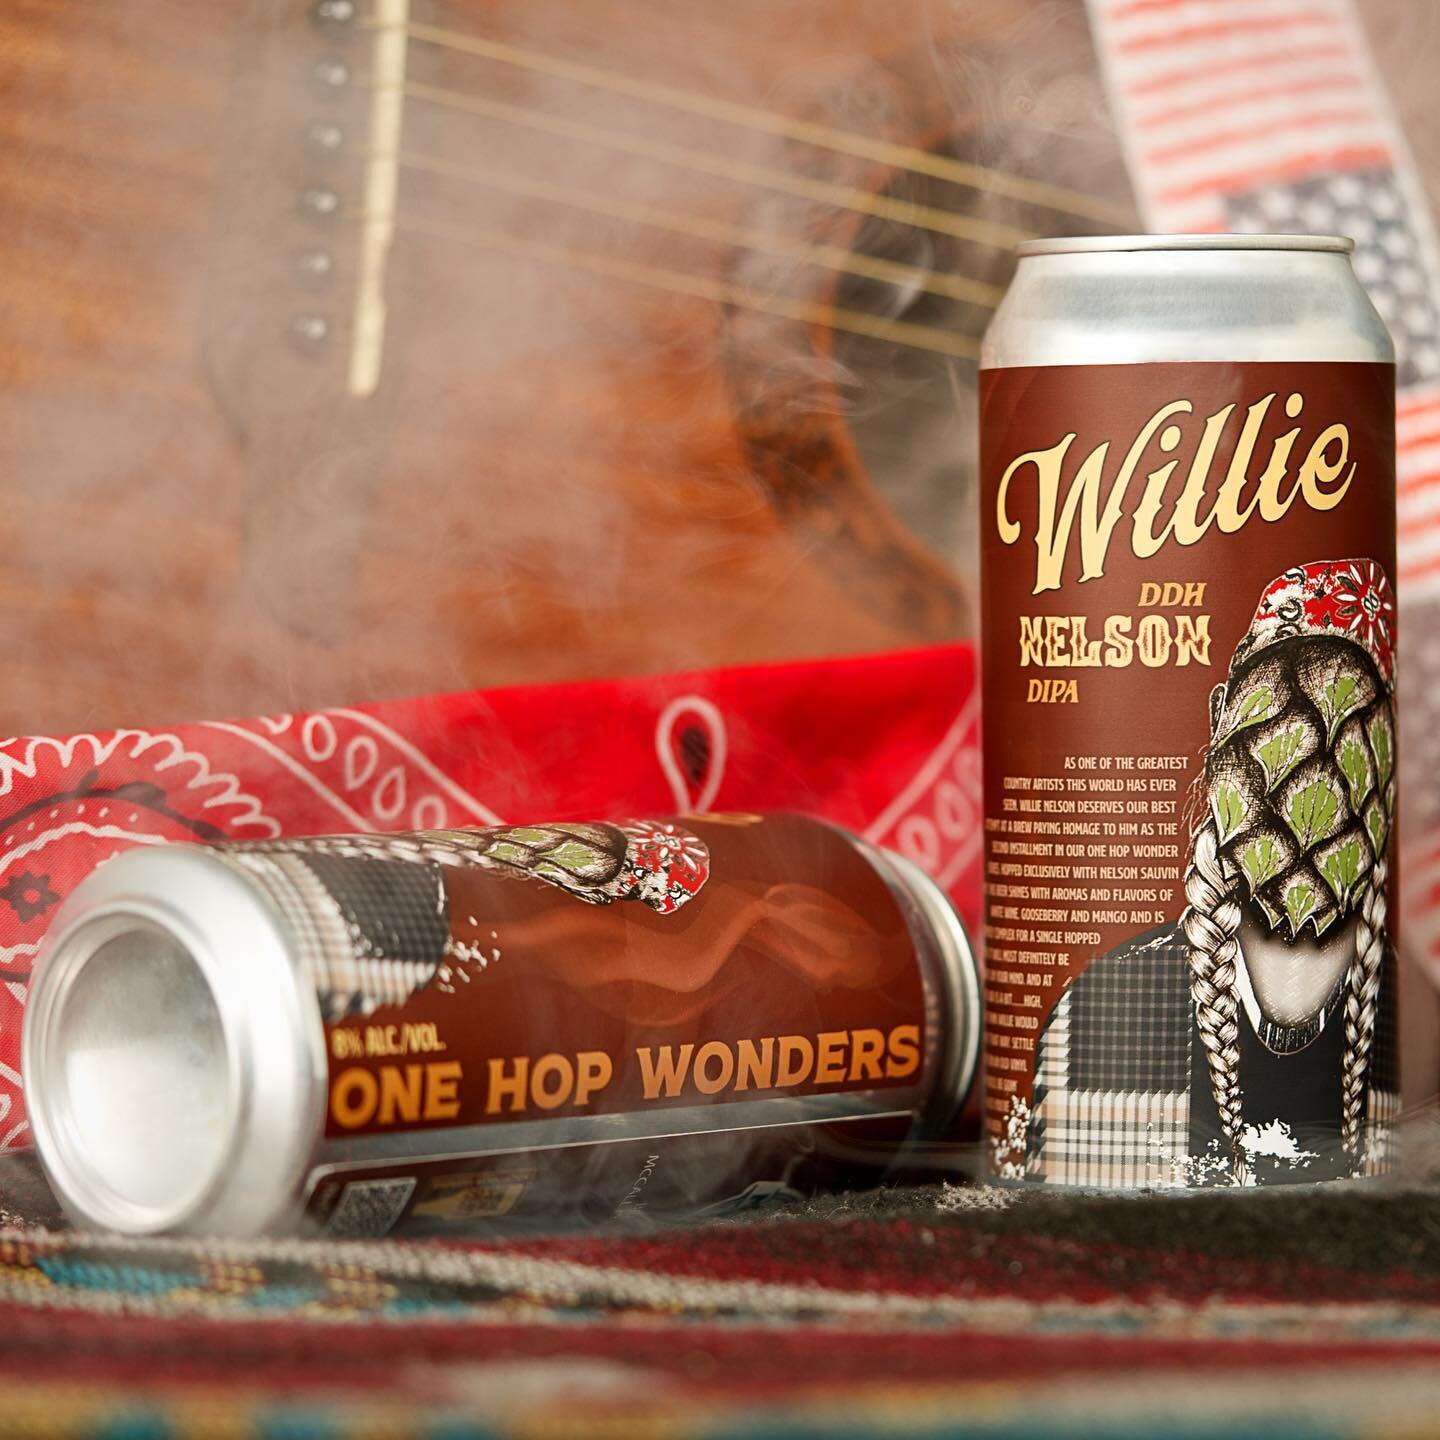 Willie Nelson has returned! The 2nd installment of our 𝐎𝐧𝐞 𝐇𝐨𝐩 𝐖𝐨𝐧𝐝𝐞𝐫𝐬 series is back again!

One Hop Wonders - 𝐖𝐢𝐥𝐥𝐢𝐞
𝐃𝐈𝐏𝐀
𝟖.𝟑%

As one of the greatest Country artists this world has ever seen, Willie Nelson deserves our bes